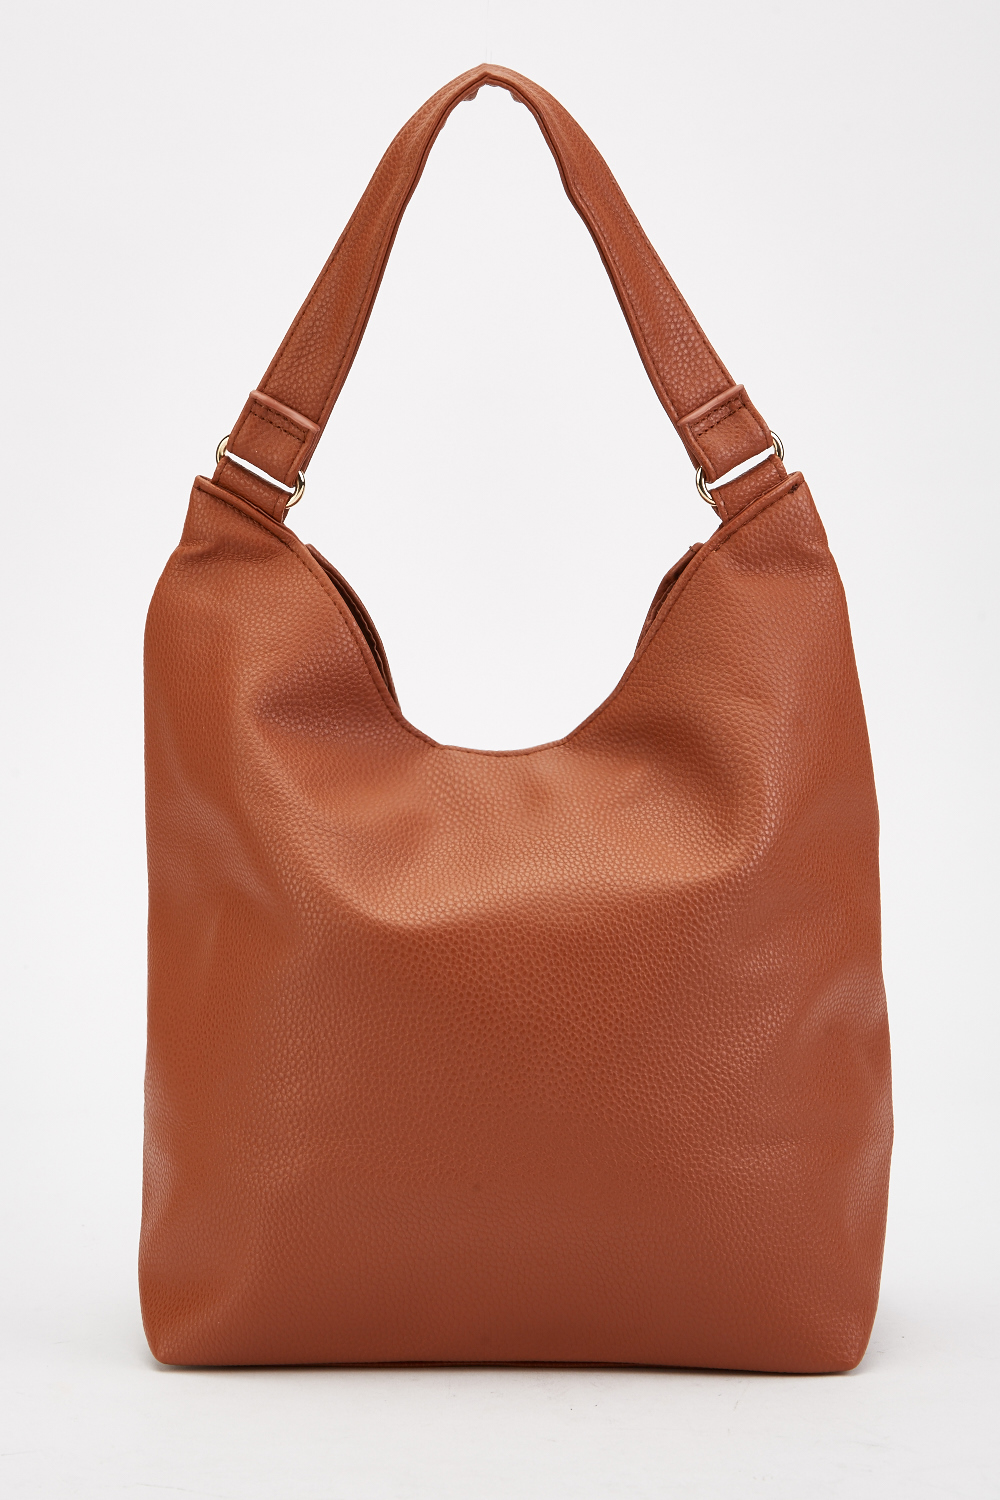 Textured Leather Hobo Bag Just 7